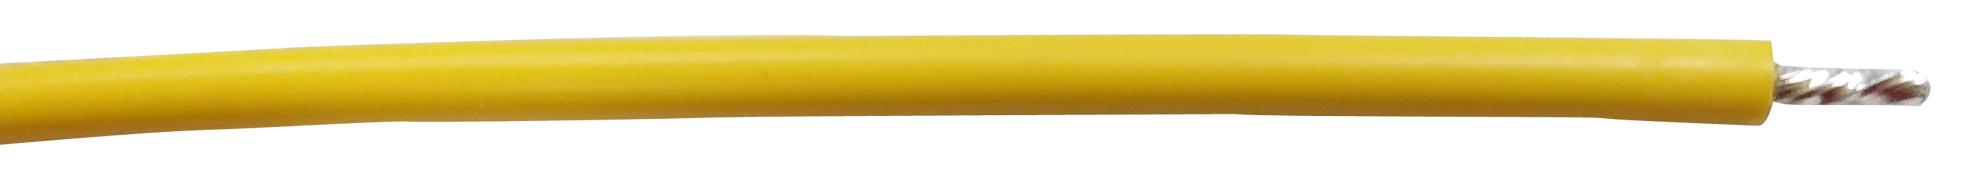 PP002303 HOOK-UP WIRE, 16AWG, YELLOW, 305M, 300V PRO POWER